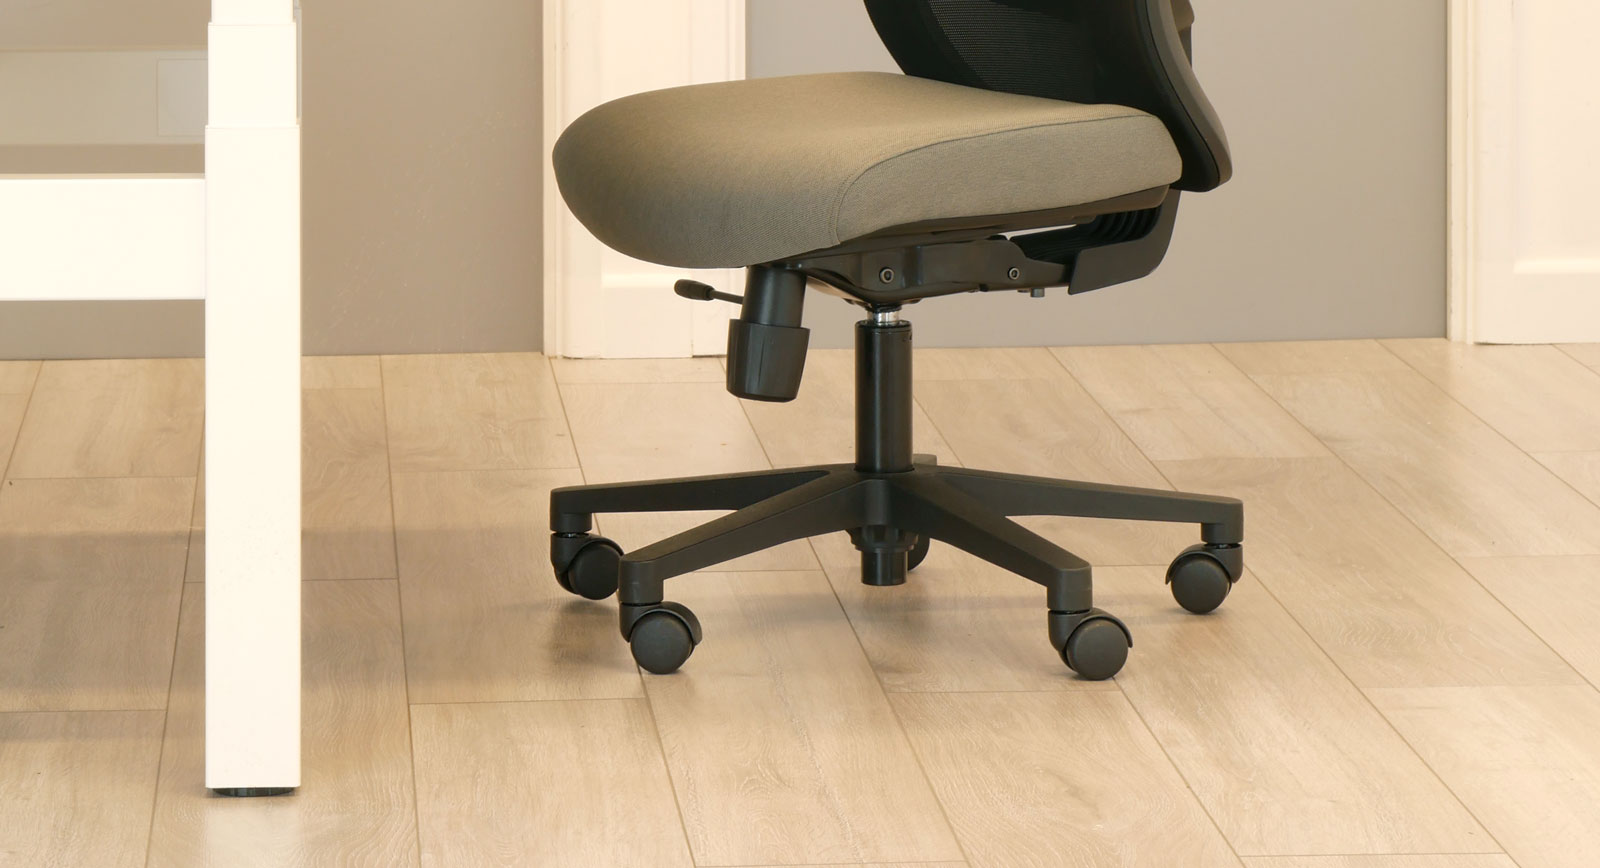 Sliding seat option and hard floor castors available